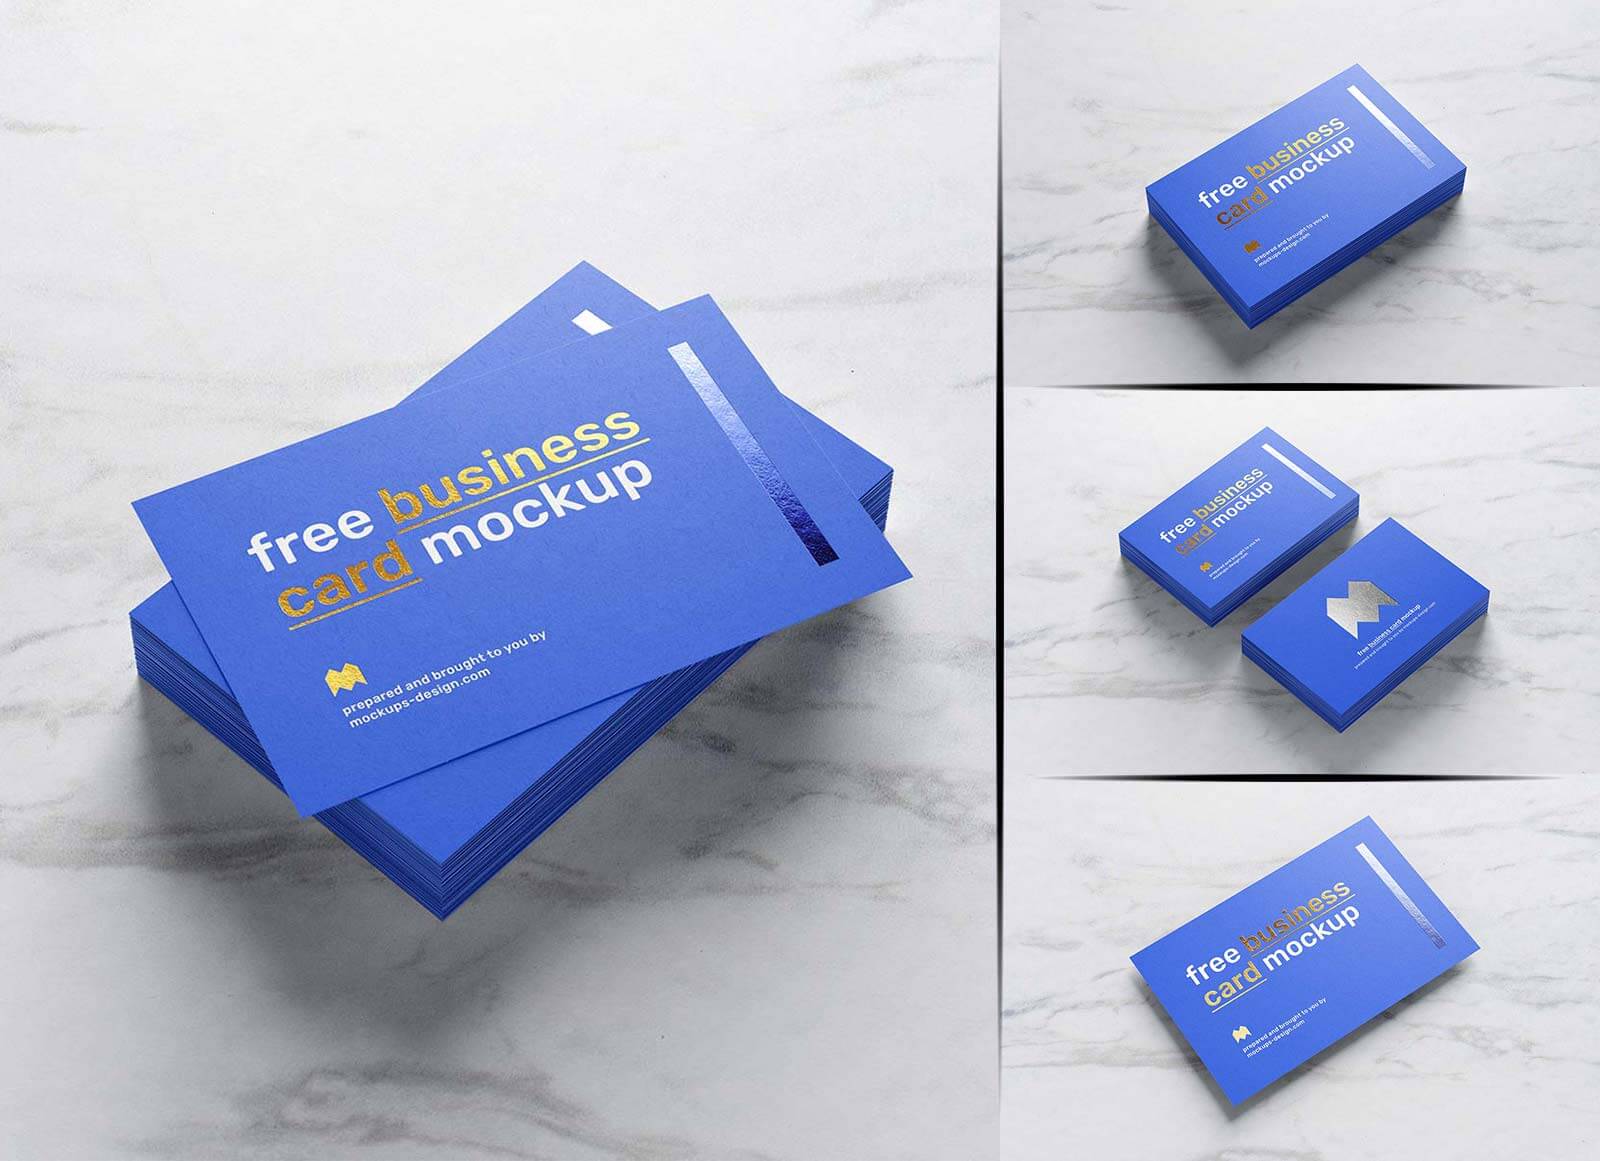 Download Free 1442+ Business Card Mockup Vk Yellowimages Mockups - Find & Download Free Graphic Resources ...